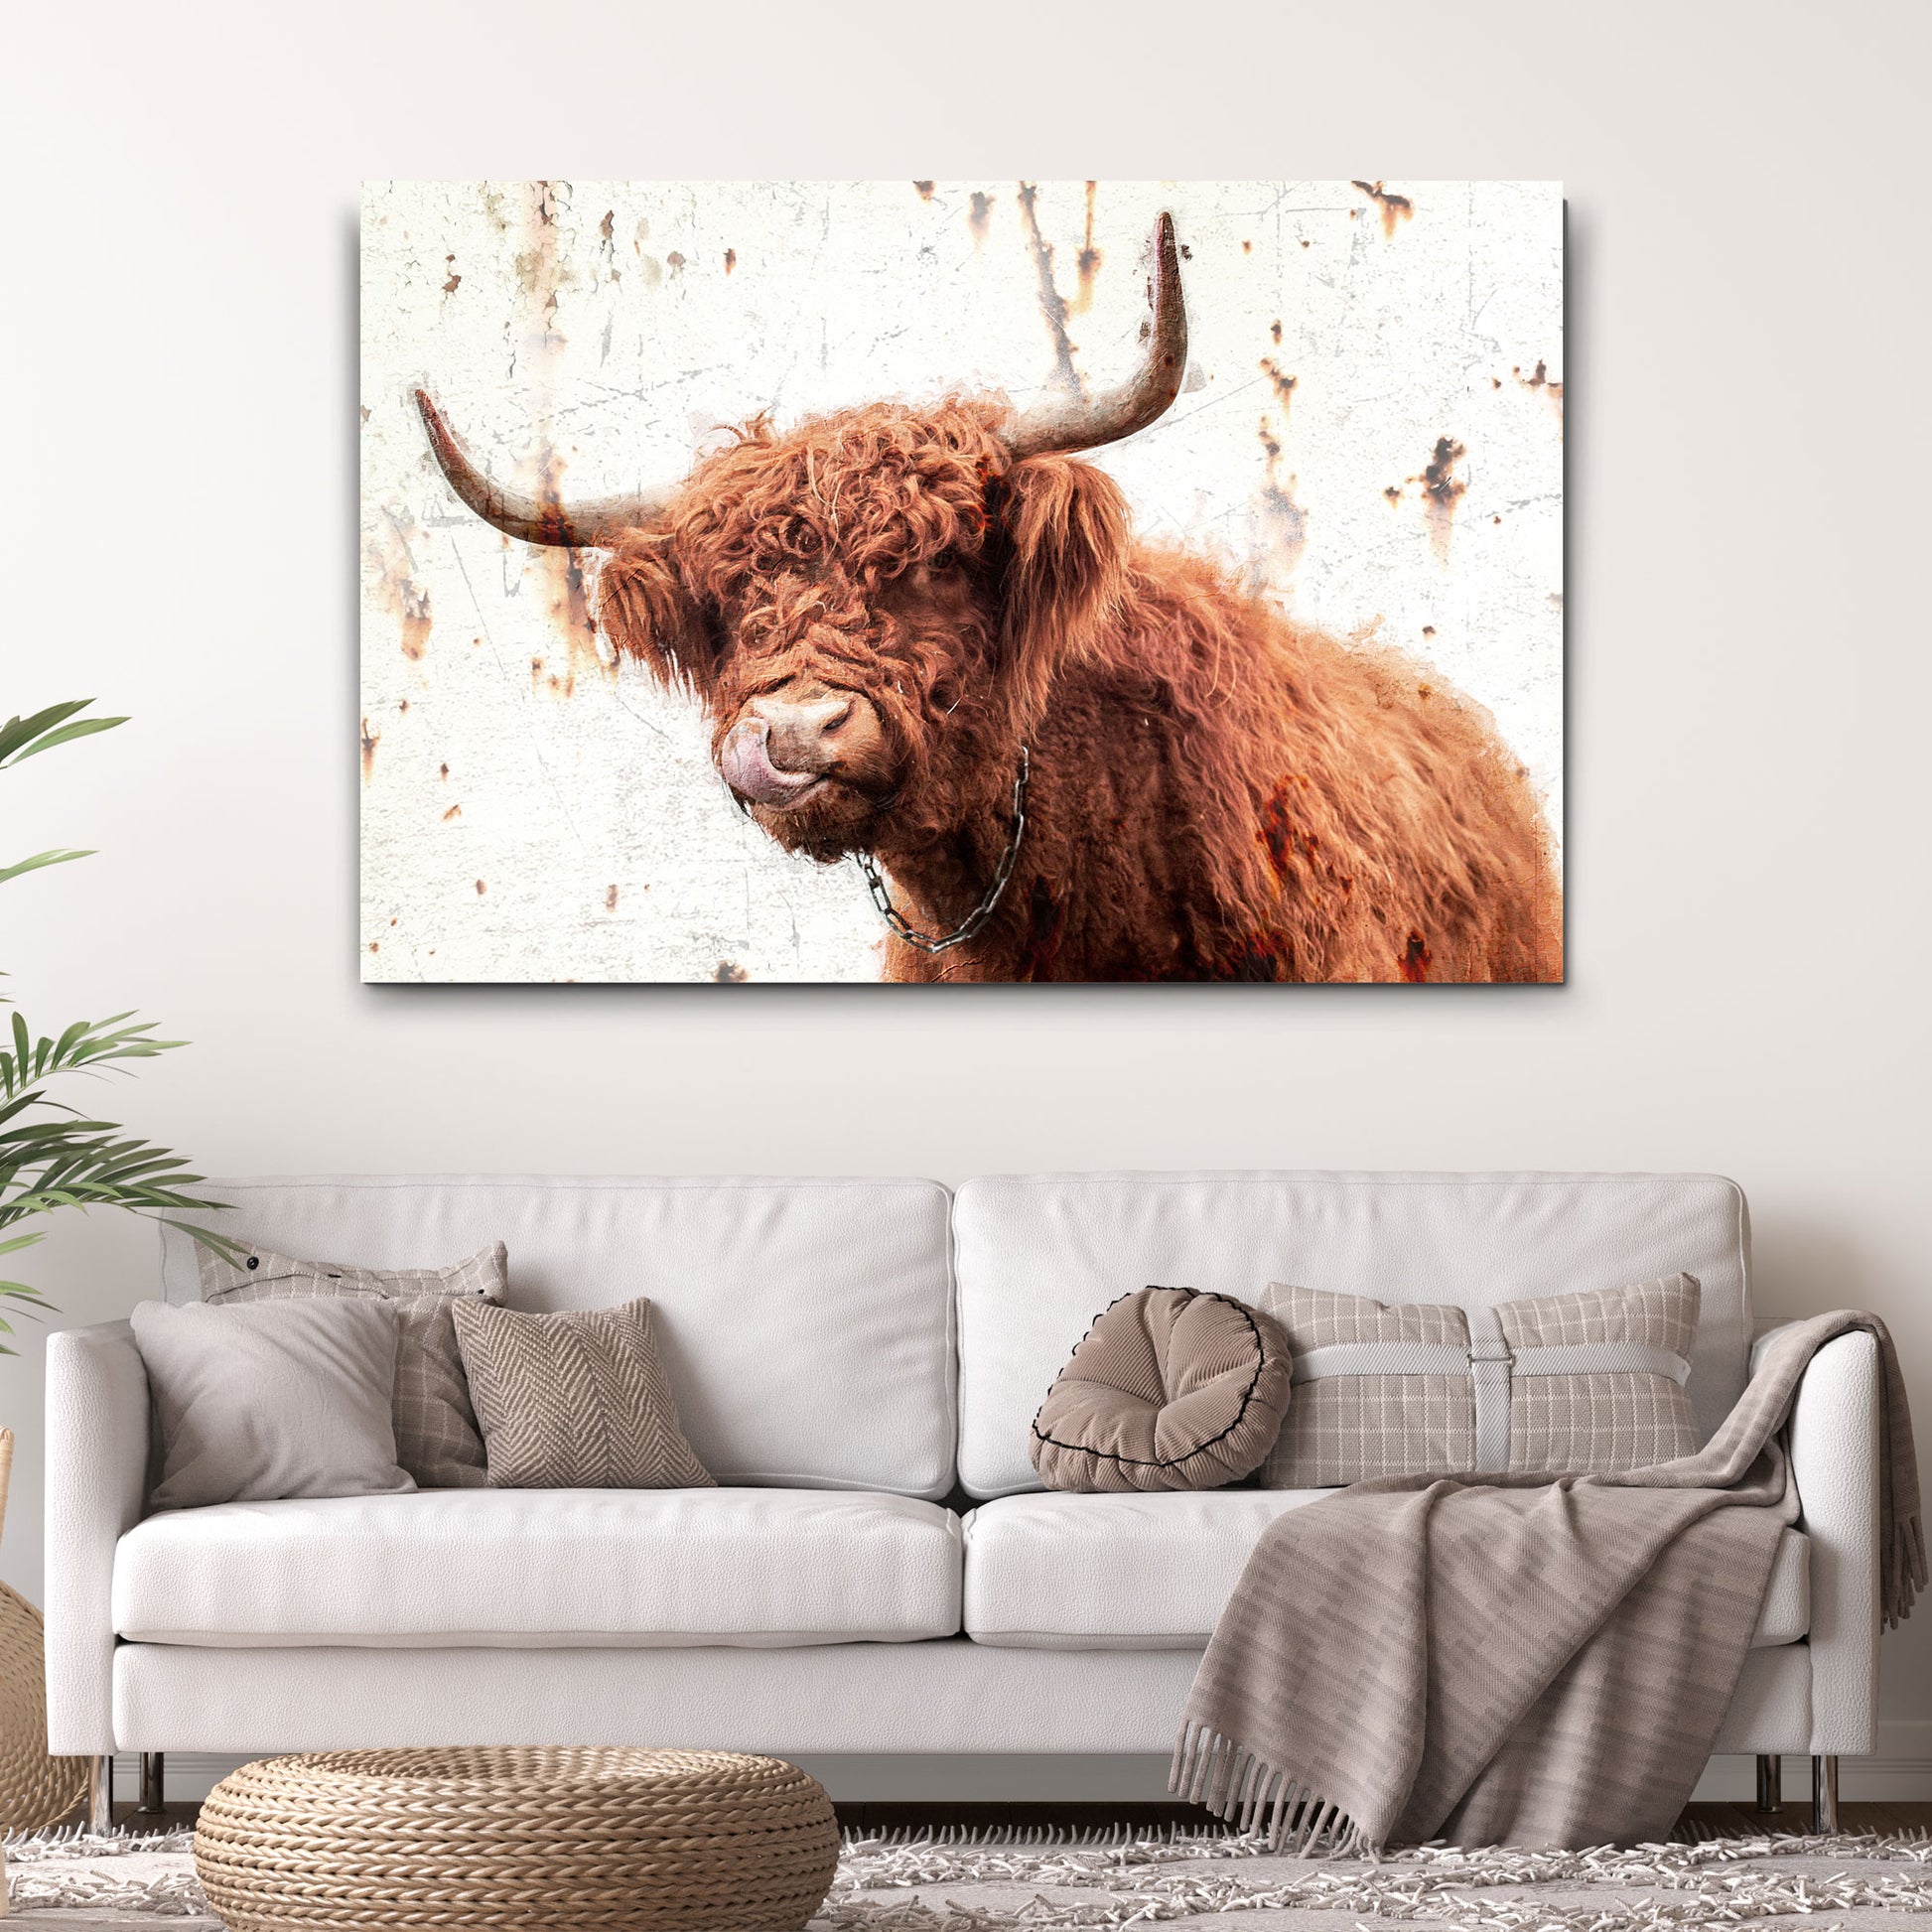 Rustic Highland Cow Canvas Wall Art Style 2 - Image by Tailored Canvases